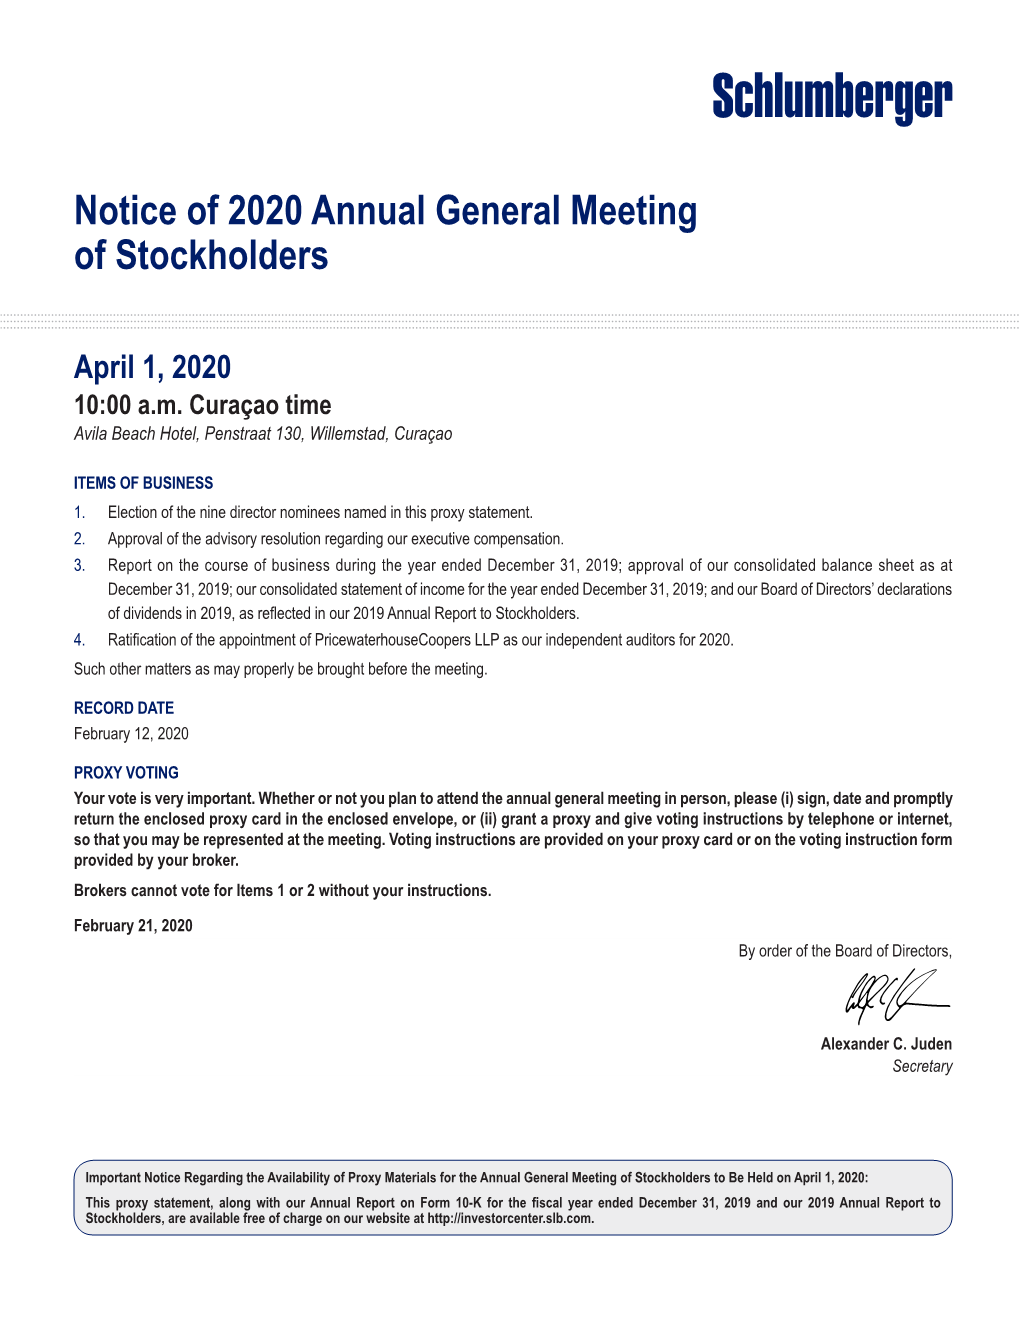 Notice of 2020 Annual General Meeting of Stockholders